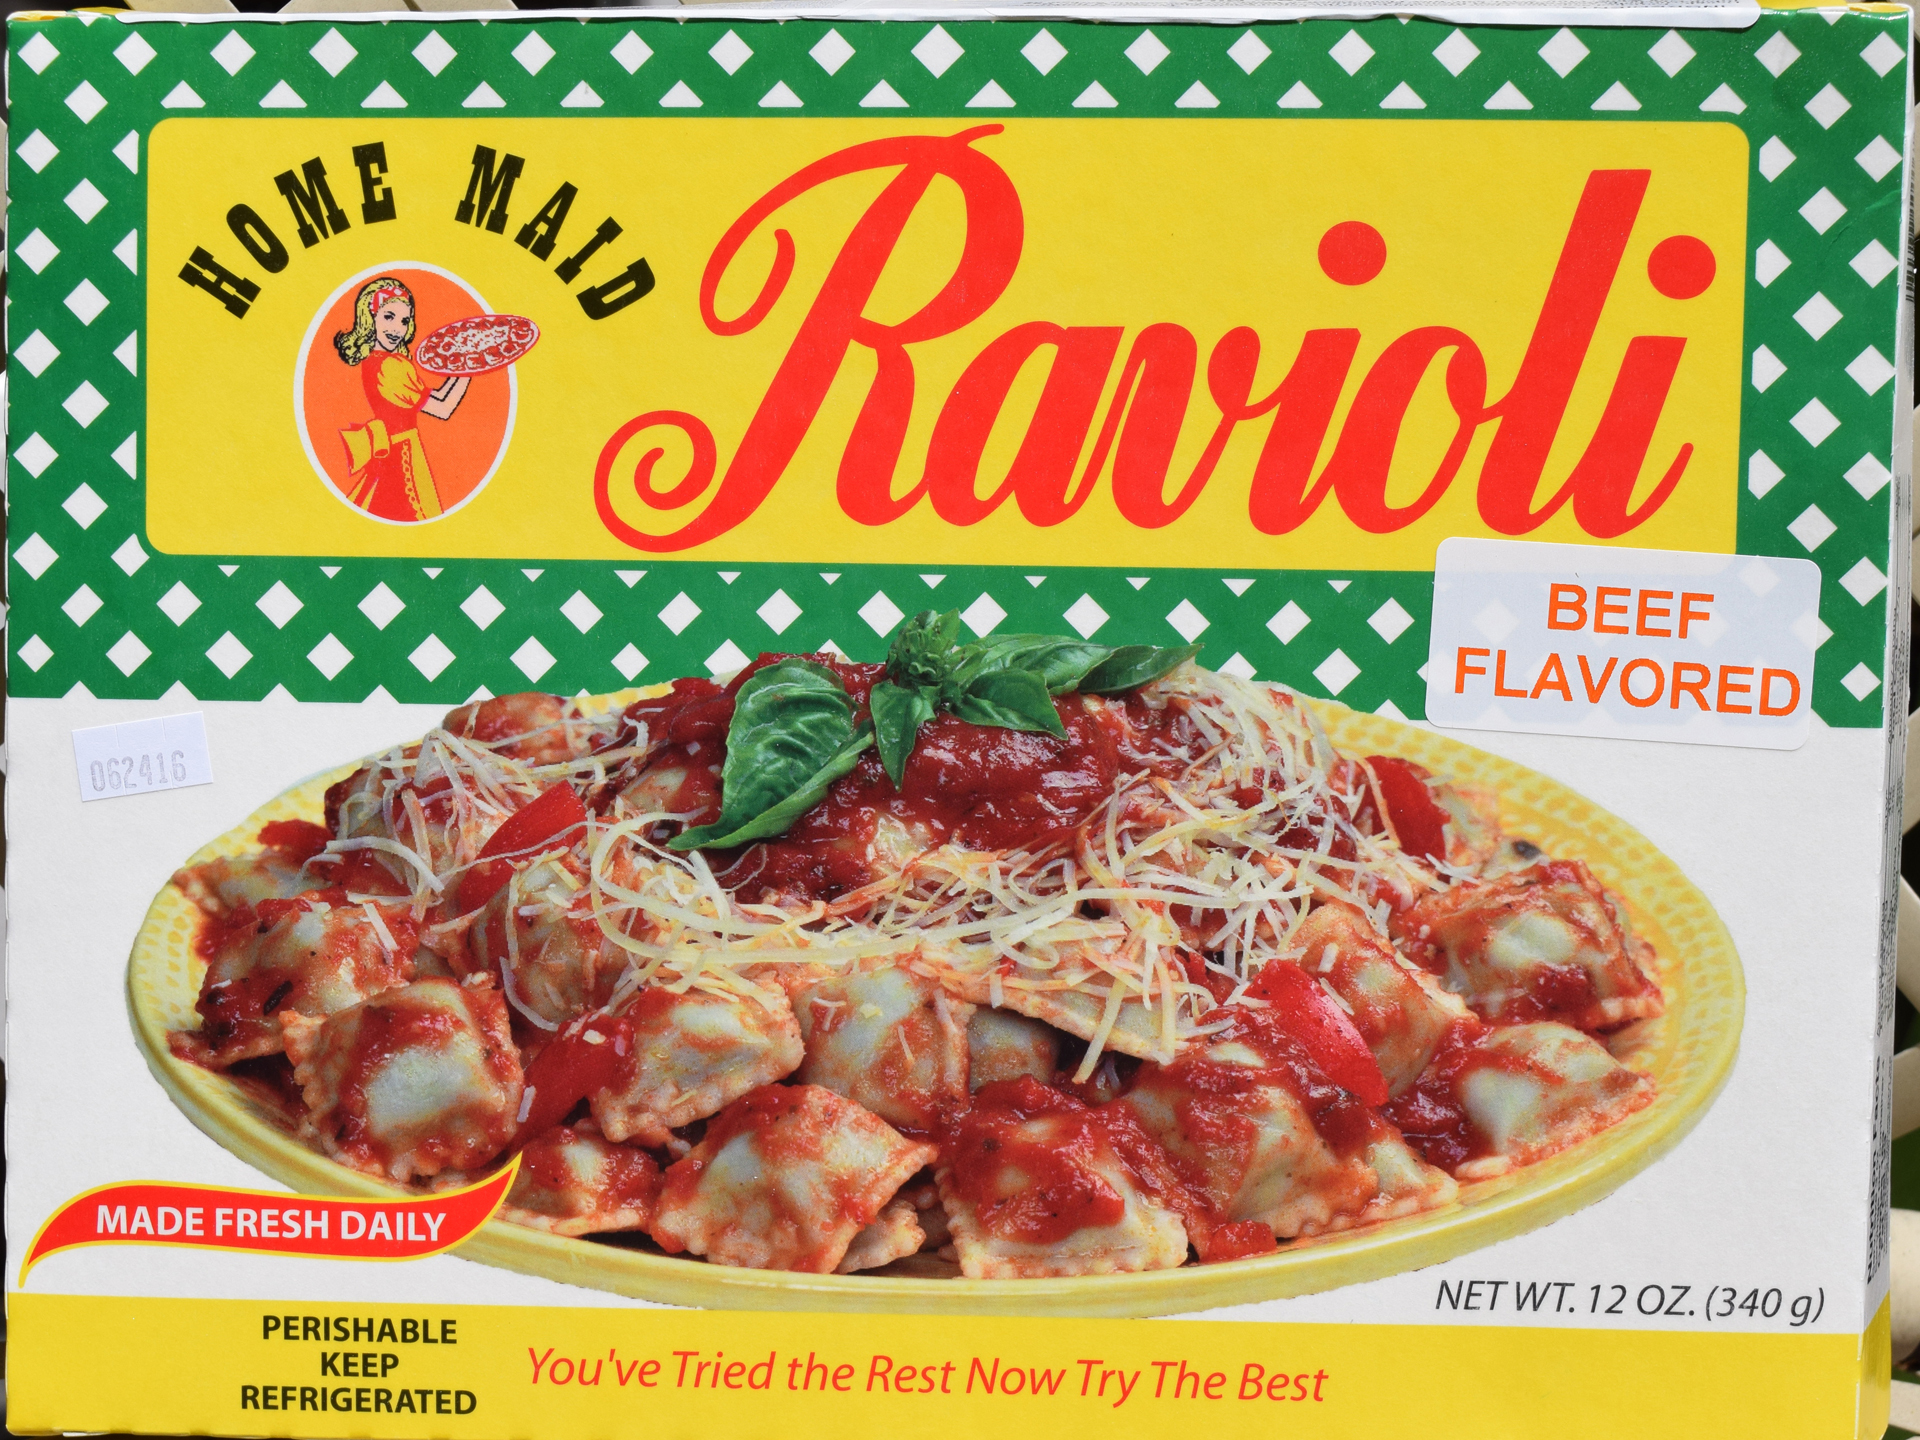 The mainstay of homey Italian eateries and delis all around the region, Home Maid's classic North Beach-style ravioli are sold fresh in a small retail store in the company's plant in an industrial area of South San Francisco. 